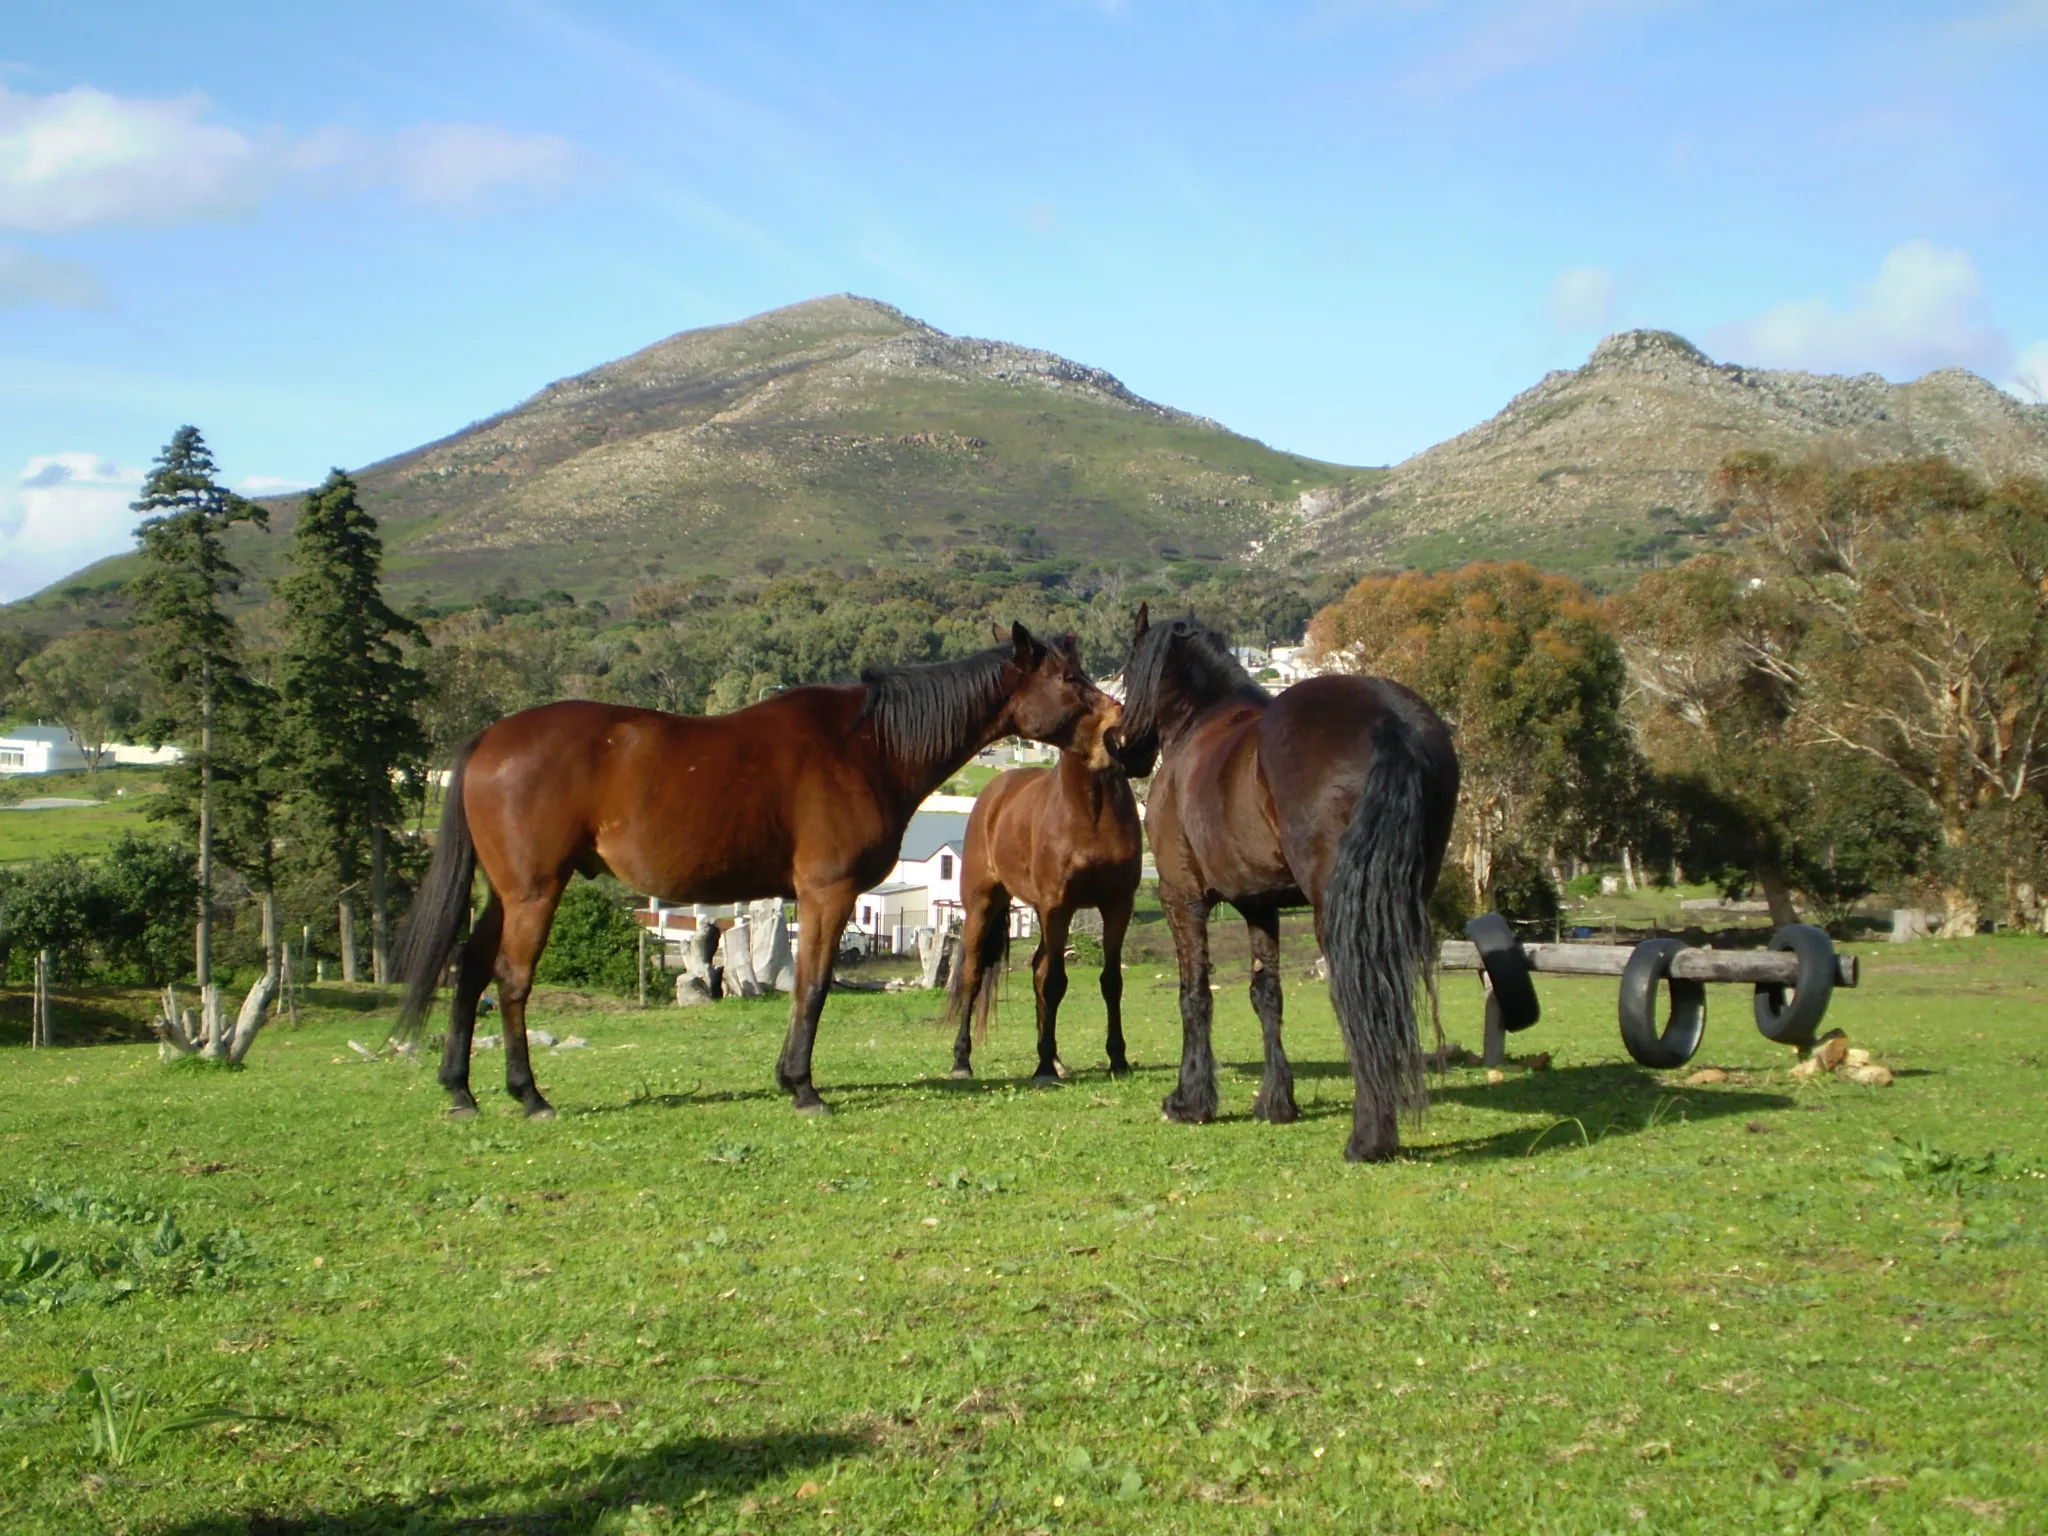 Horses in the field. Horse riding in the Western Cape